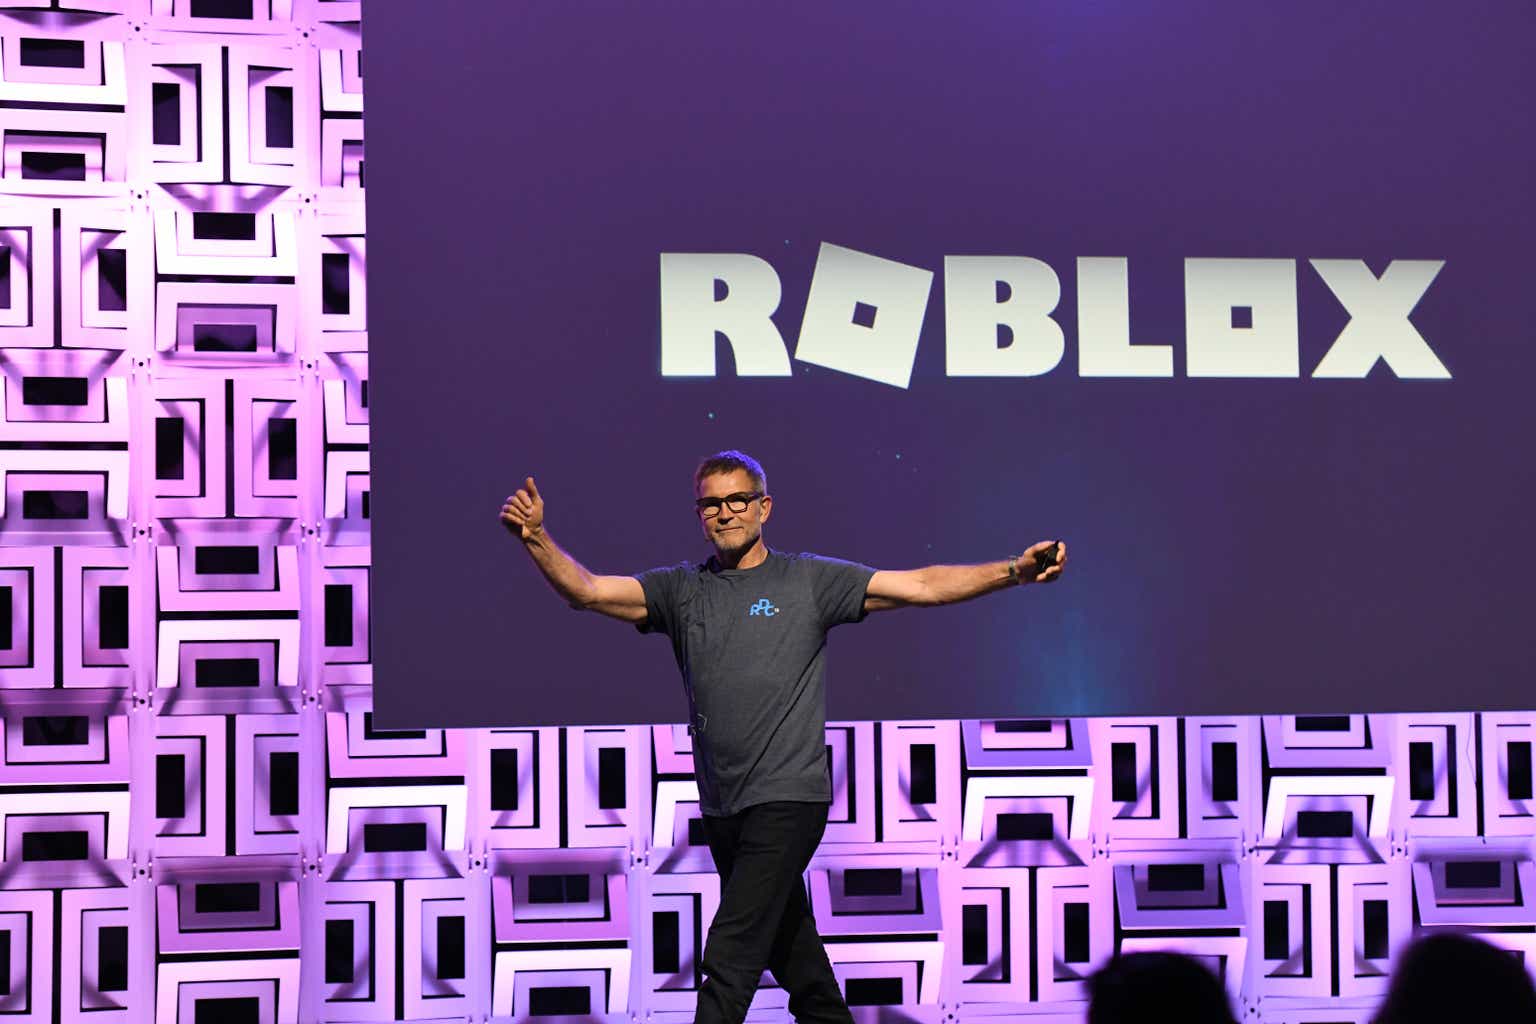 The Best Roblox Extensions To Use In 2021! (Helpful Features) 